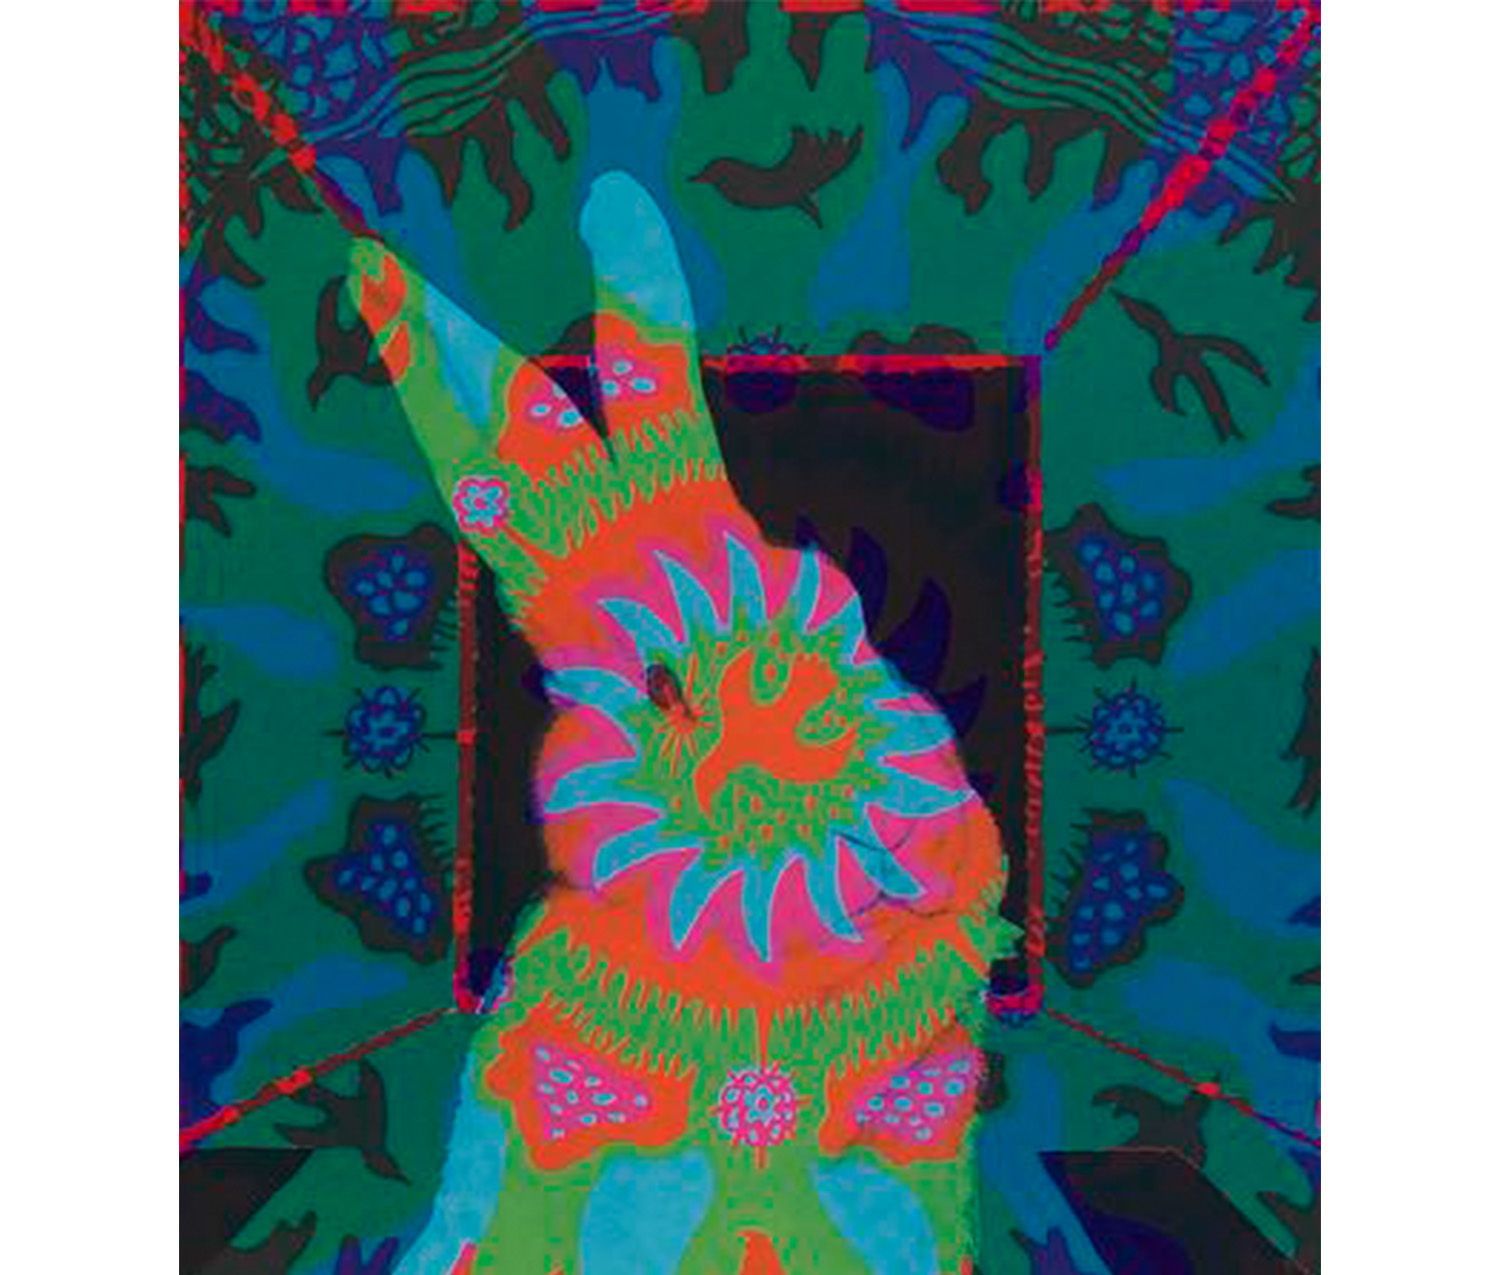 white rabbit with swirling patterns in blue, orange, green, and pink overlaid on top of it